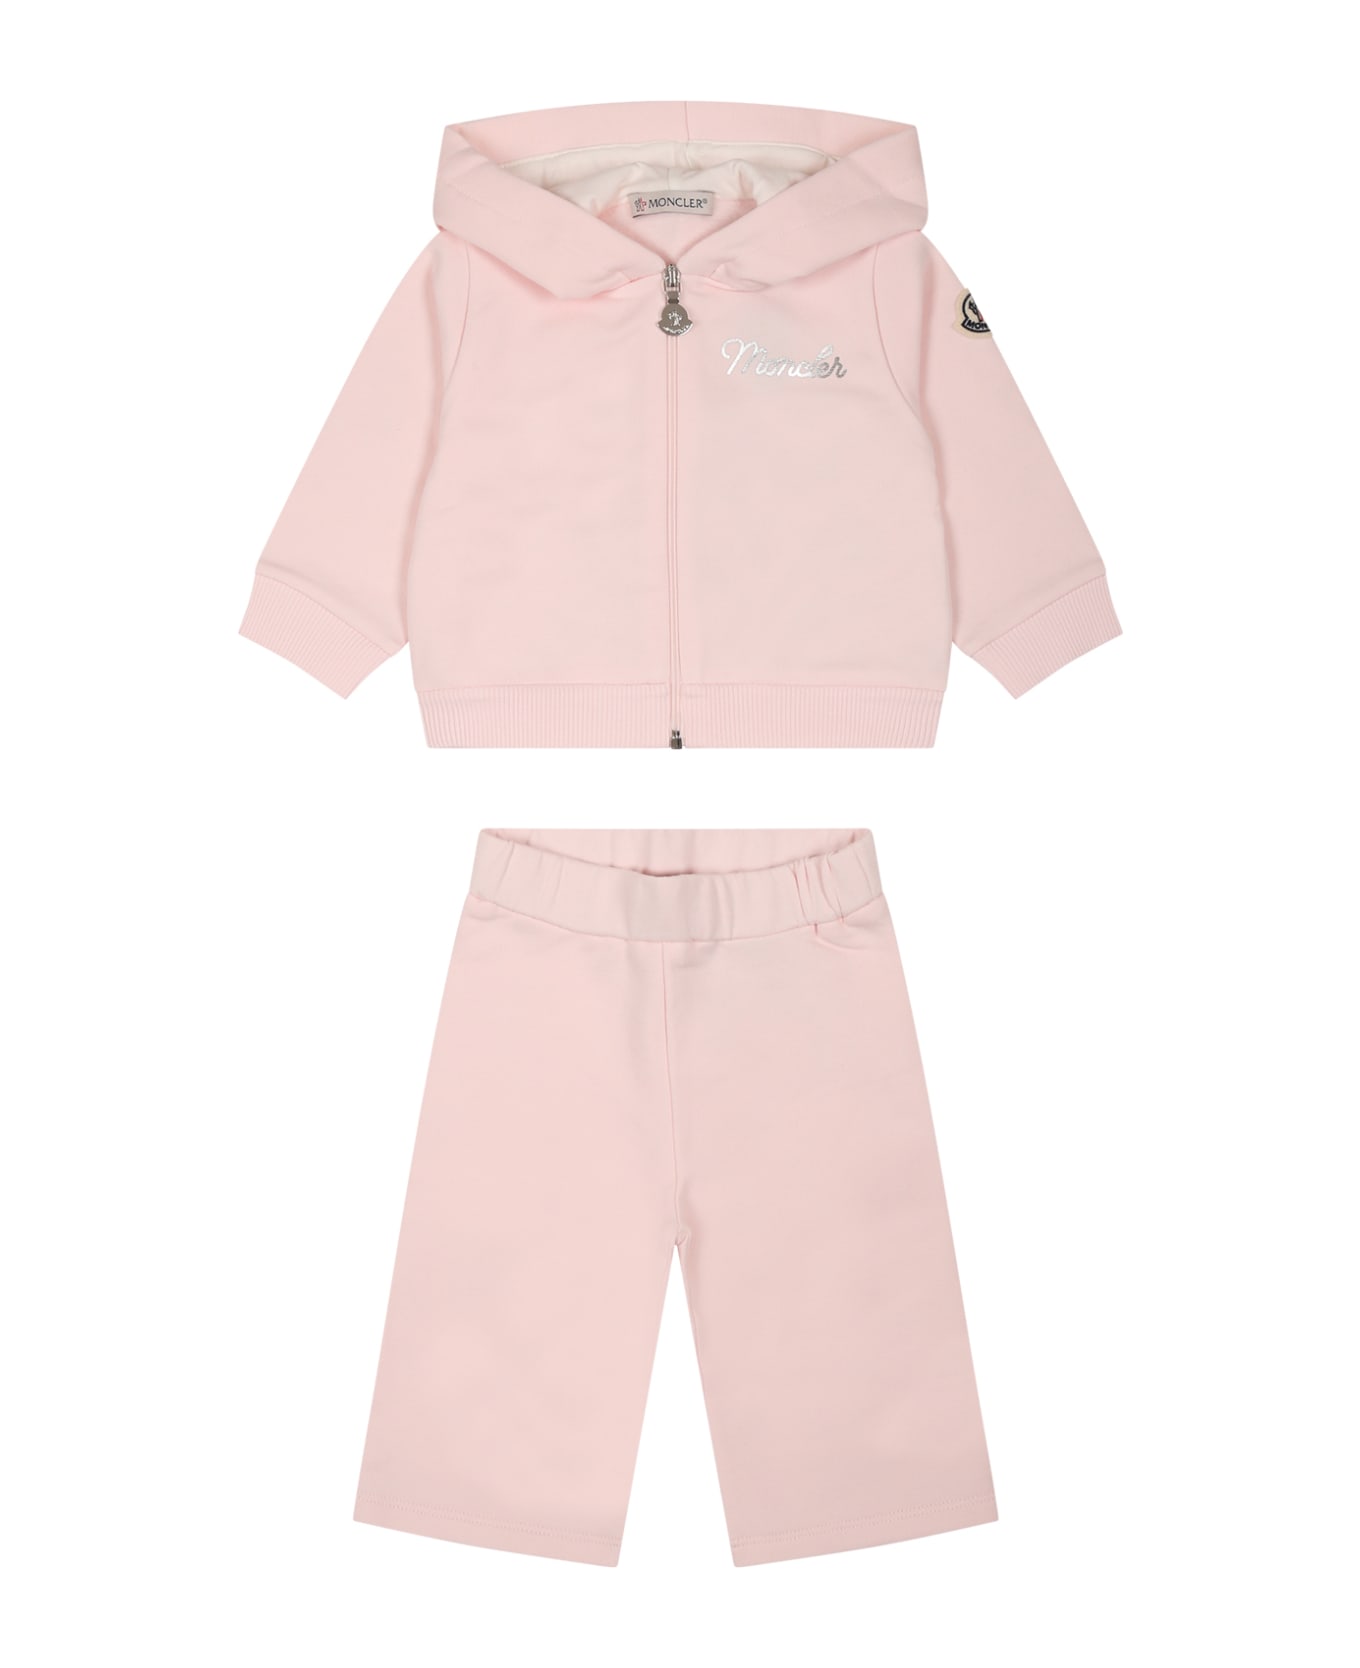 Moncler Pink Suit For Baby Girl With Logo - Pink